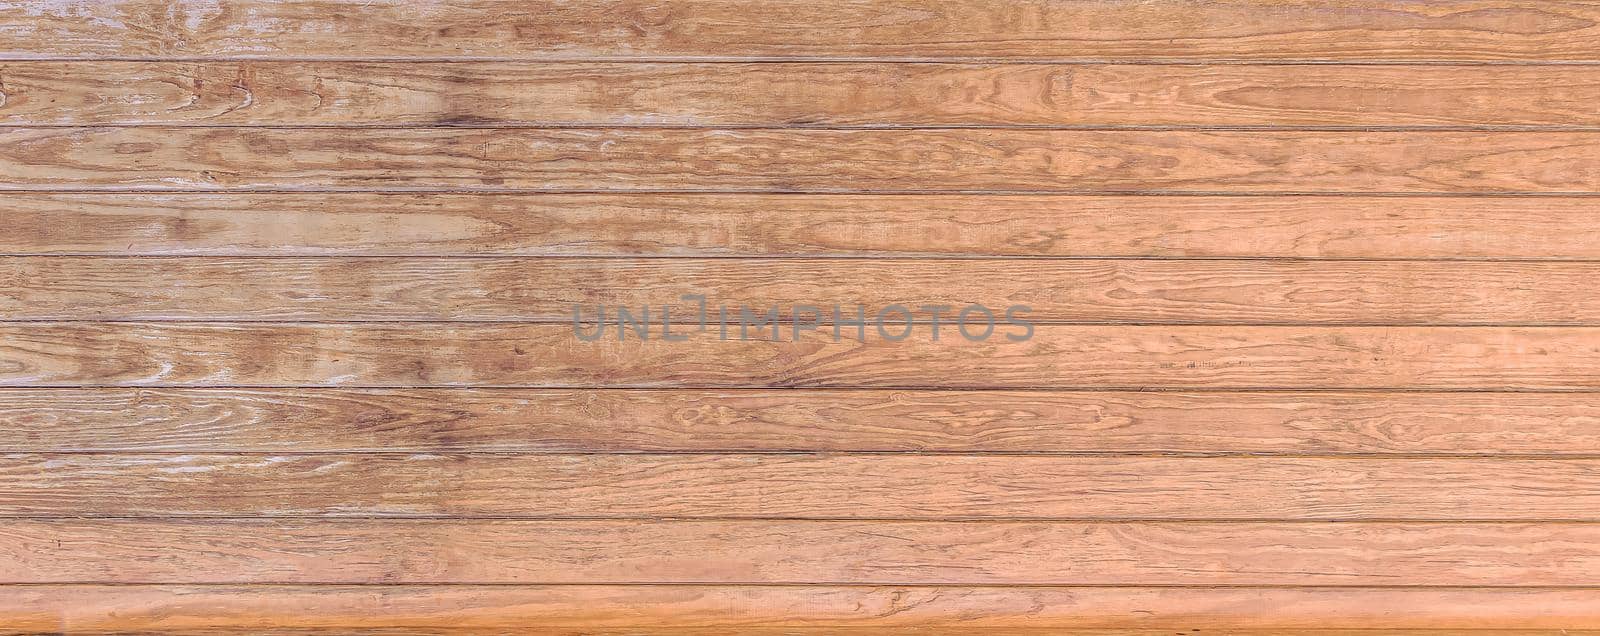 Brown wood texture empty template. Wall of old wooden plank boards. Material texture surface. by DmytroRazinkov